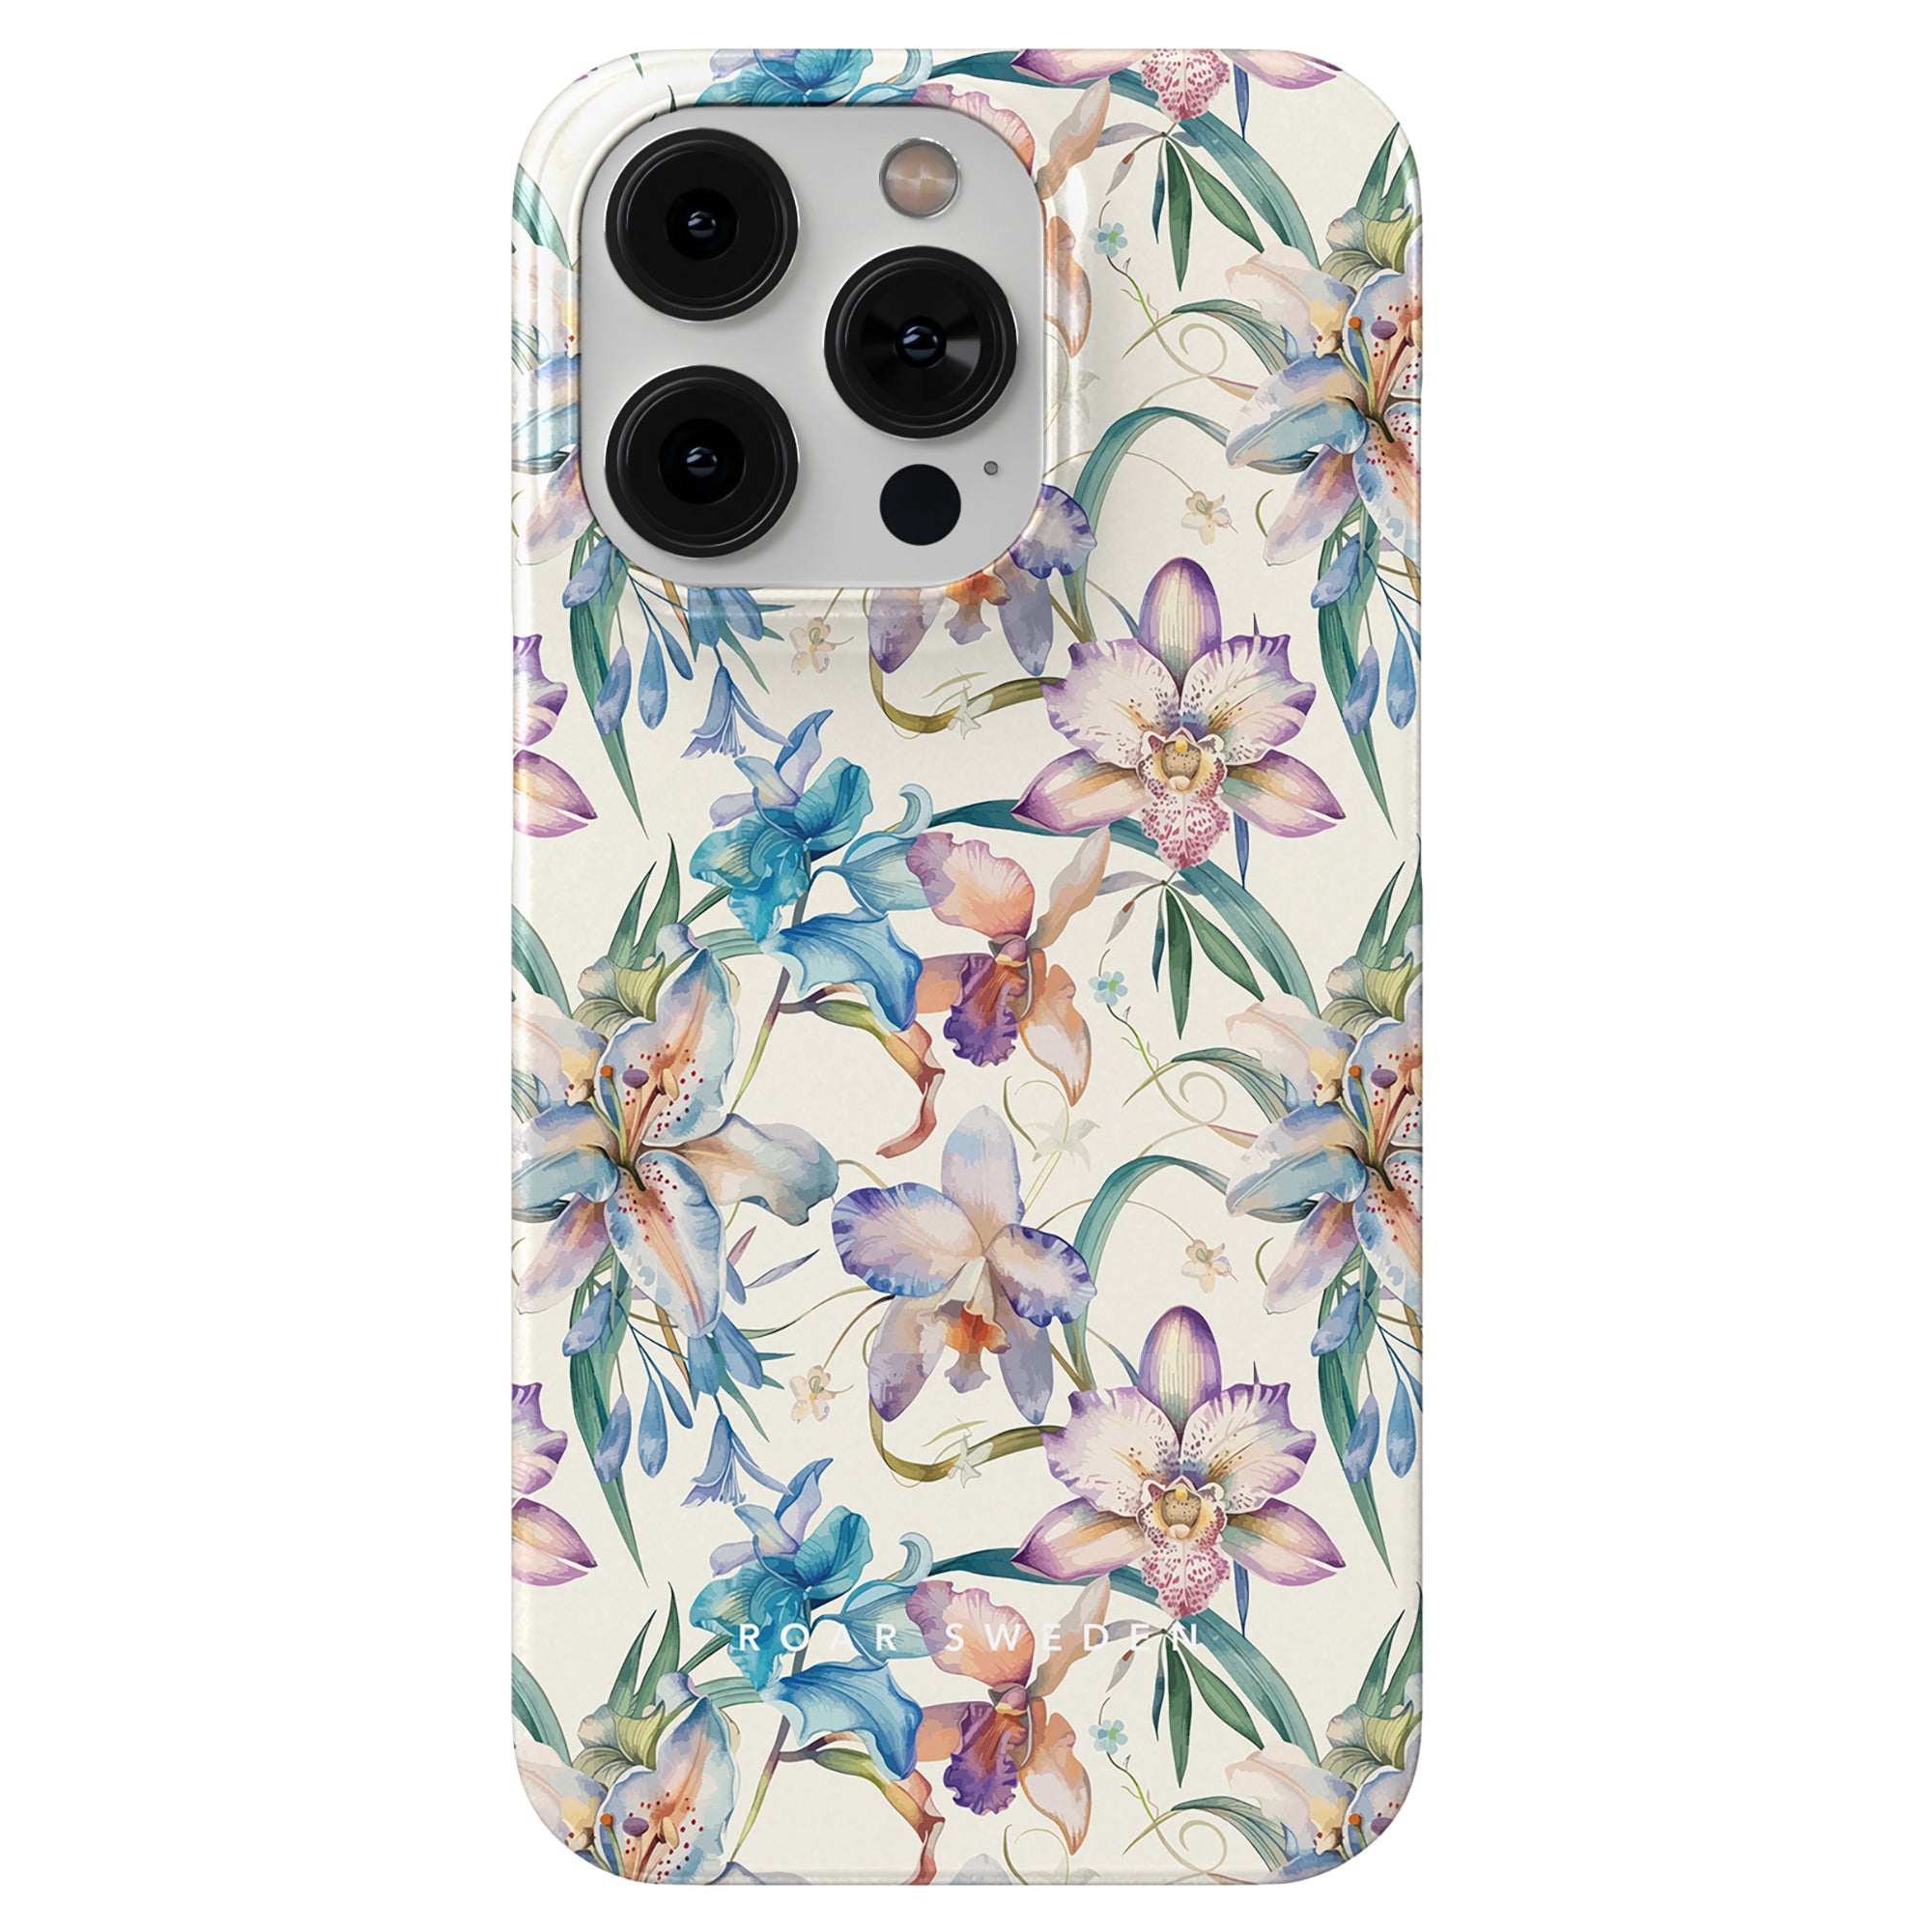 A smartphone with a case from the Floral Collection, featuring a vibrant floral design in various colors. The Bouquet - Slim Case offers stylish smartphone protection with "DROSEWID" elegantly inscribed near the bottom.